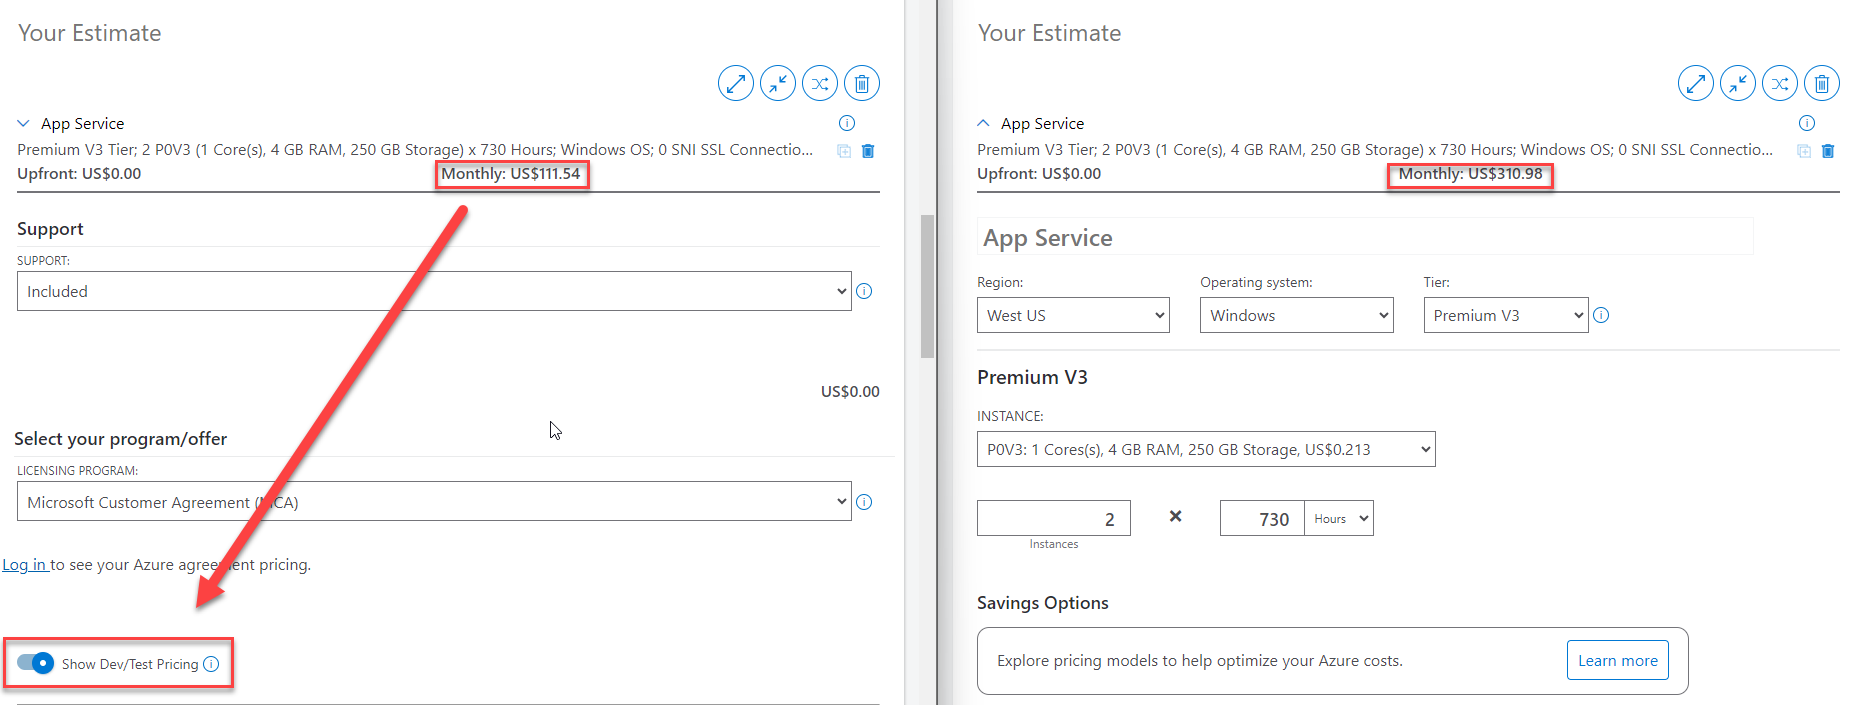 Azure App Service Pay-as-you-go and Dev/Test pricing